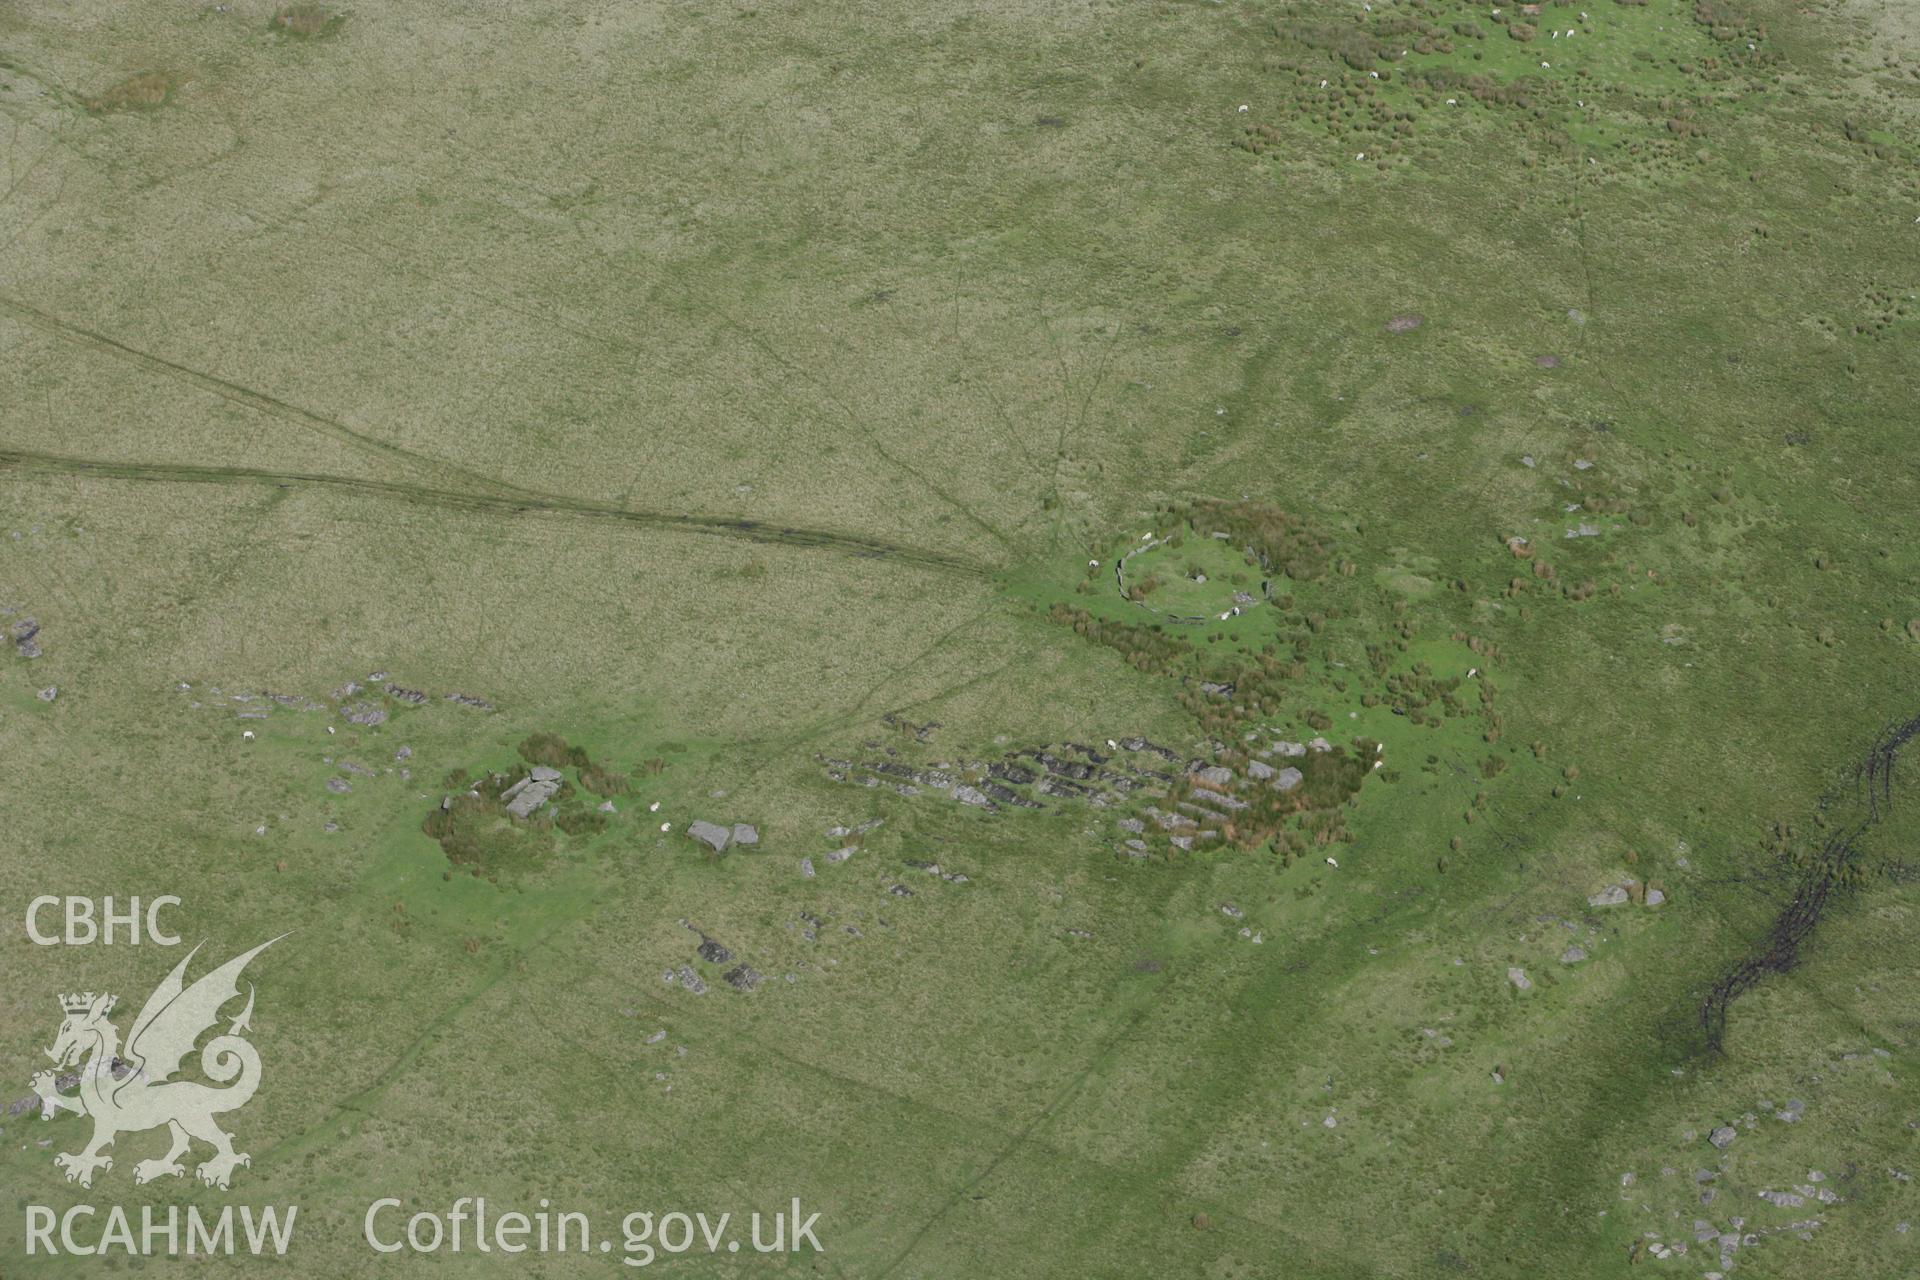 RCAHMW colour oblique photograph of Carn Llechart, with Burial Chamber nearby. Taken by Toby Driver on 12/09/2008.